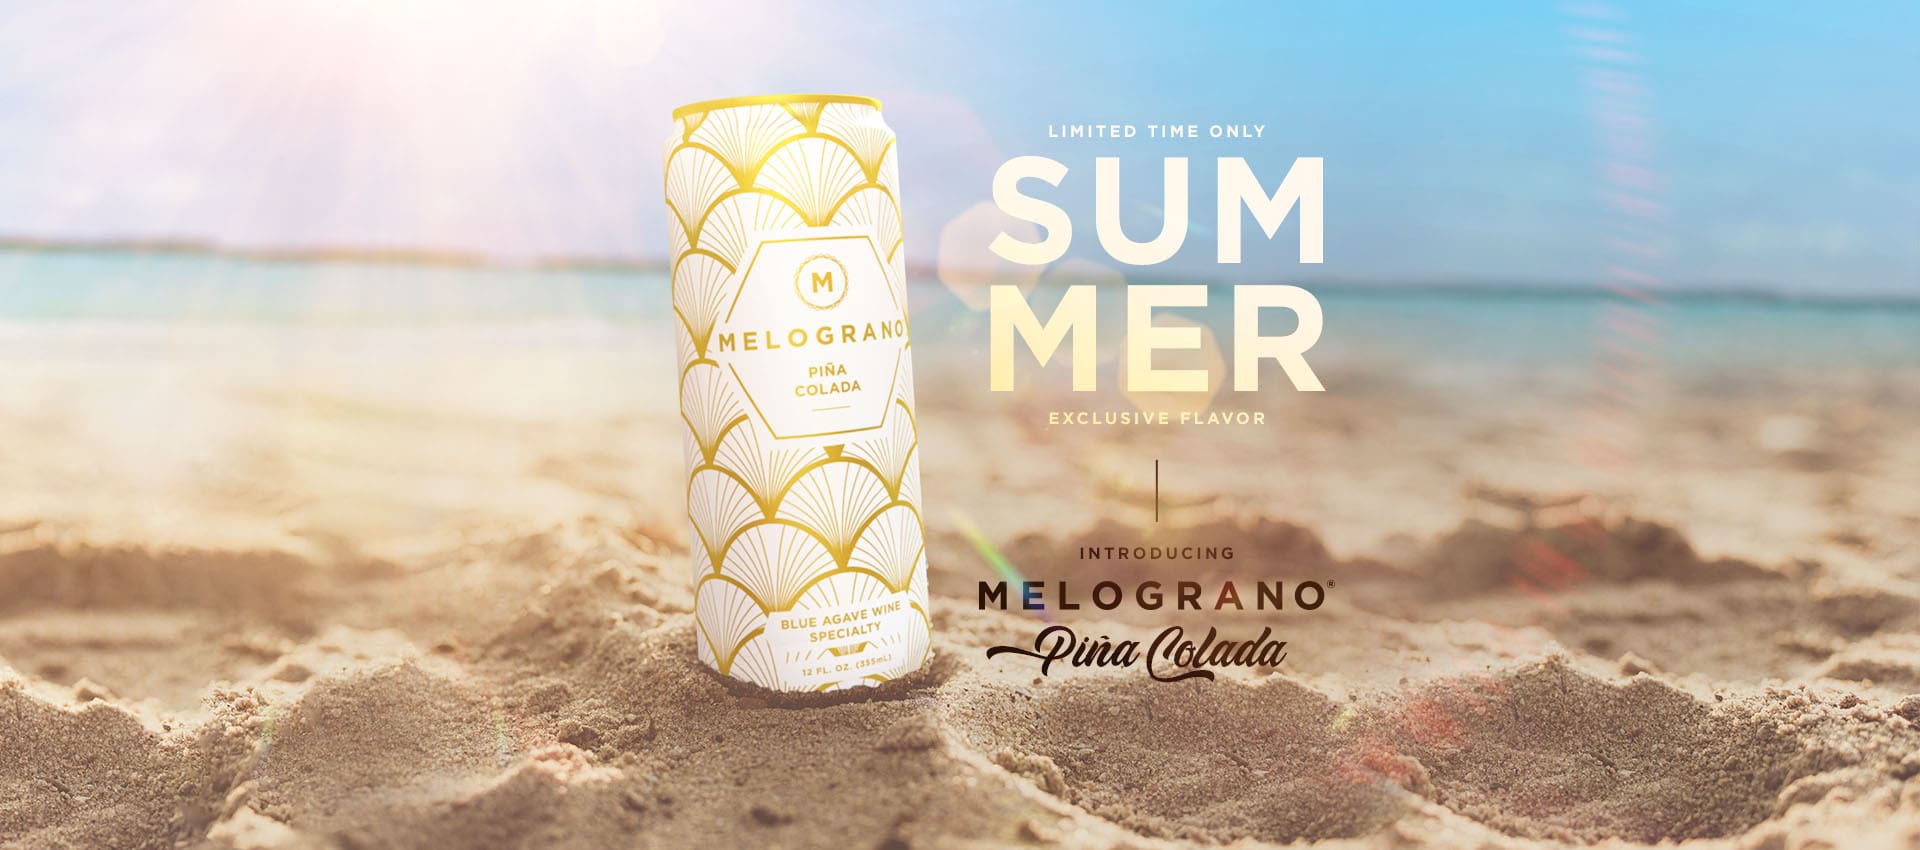 Piña Colada Melograno - Limited Time Only Exclusive Flavor for Summer